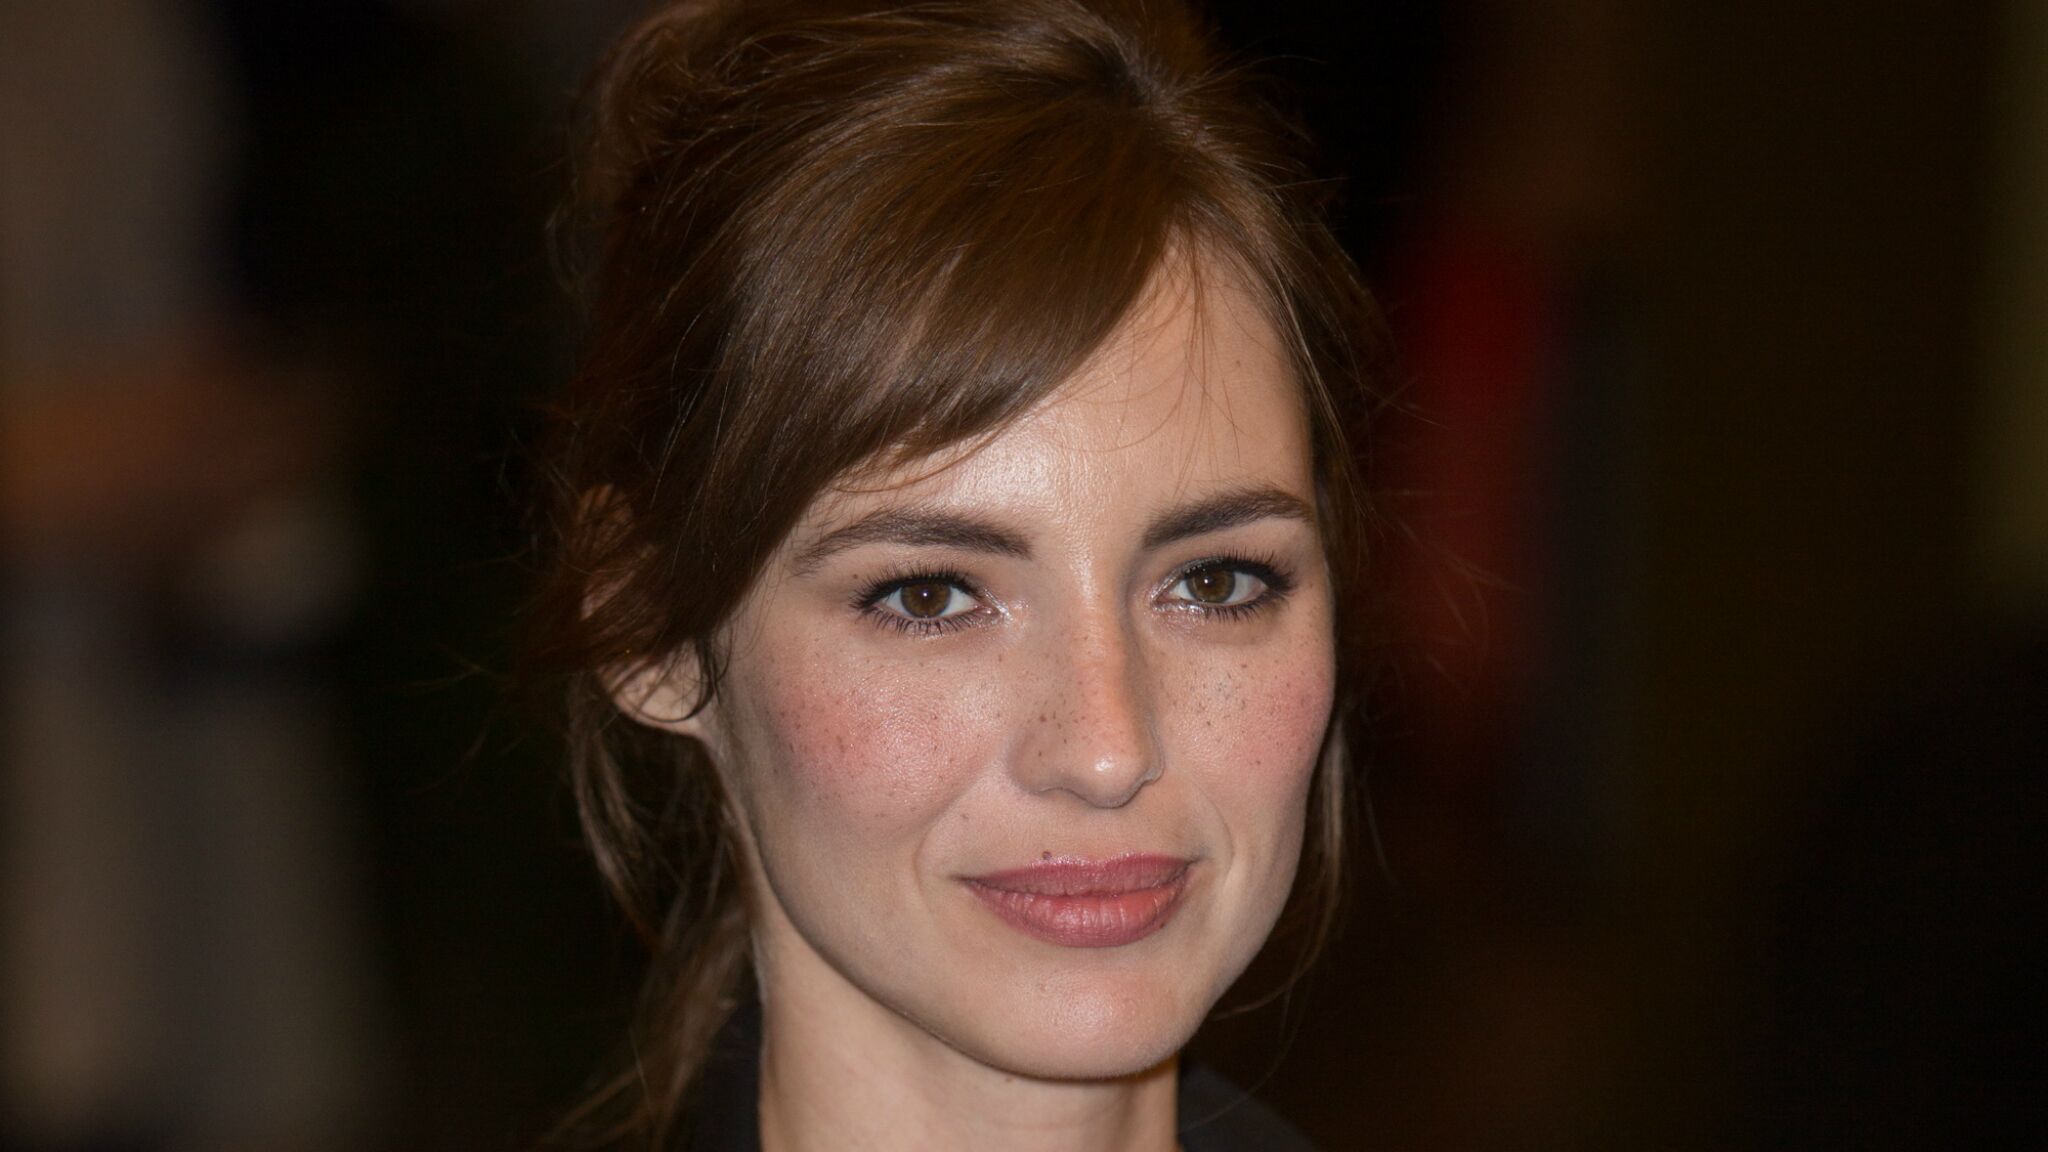 louise bourgoin instagramlouise bourgoin l'oreal, louise bourgoin julien doré, louise bourgoin l'un dans l'autre, louise bourgoin films, louise bourgoin instagram, louise bourgoin 2019, louise bourgoin miss meteo, louise bourgoin net worth, louise bourgoin tepr, louise bourgoin imdb, louise bourgoin, louise bourgoin couple, louise bourgoin mari, louise bourgoin compagnon, louise bourgoin taille, louise bourgoin insta, louise bourgoin martin weill, louise bourgoin et son fils, louise bourgoin hippocrate, louise bourgoin meteo